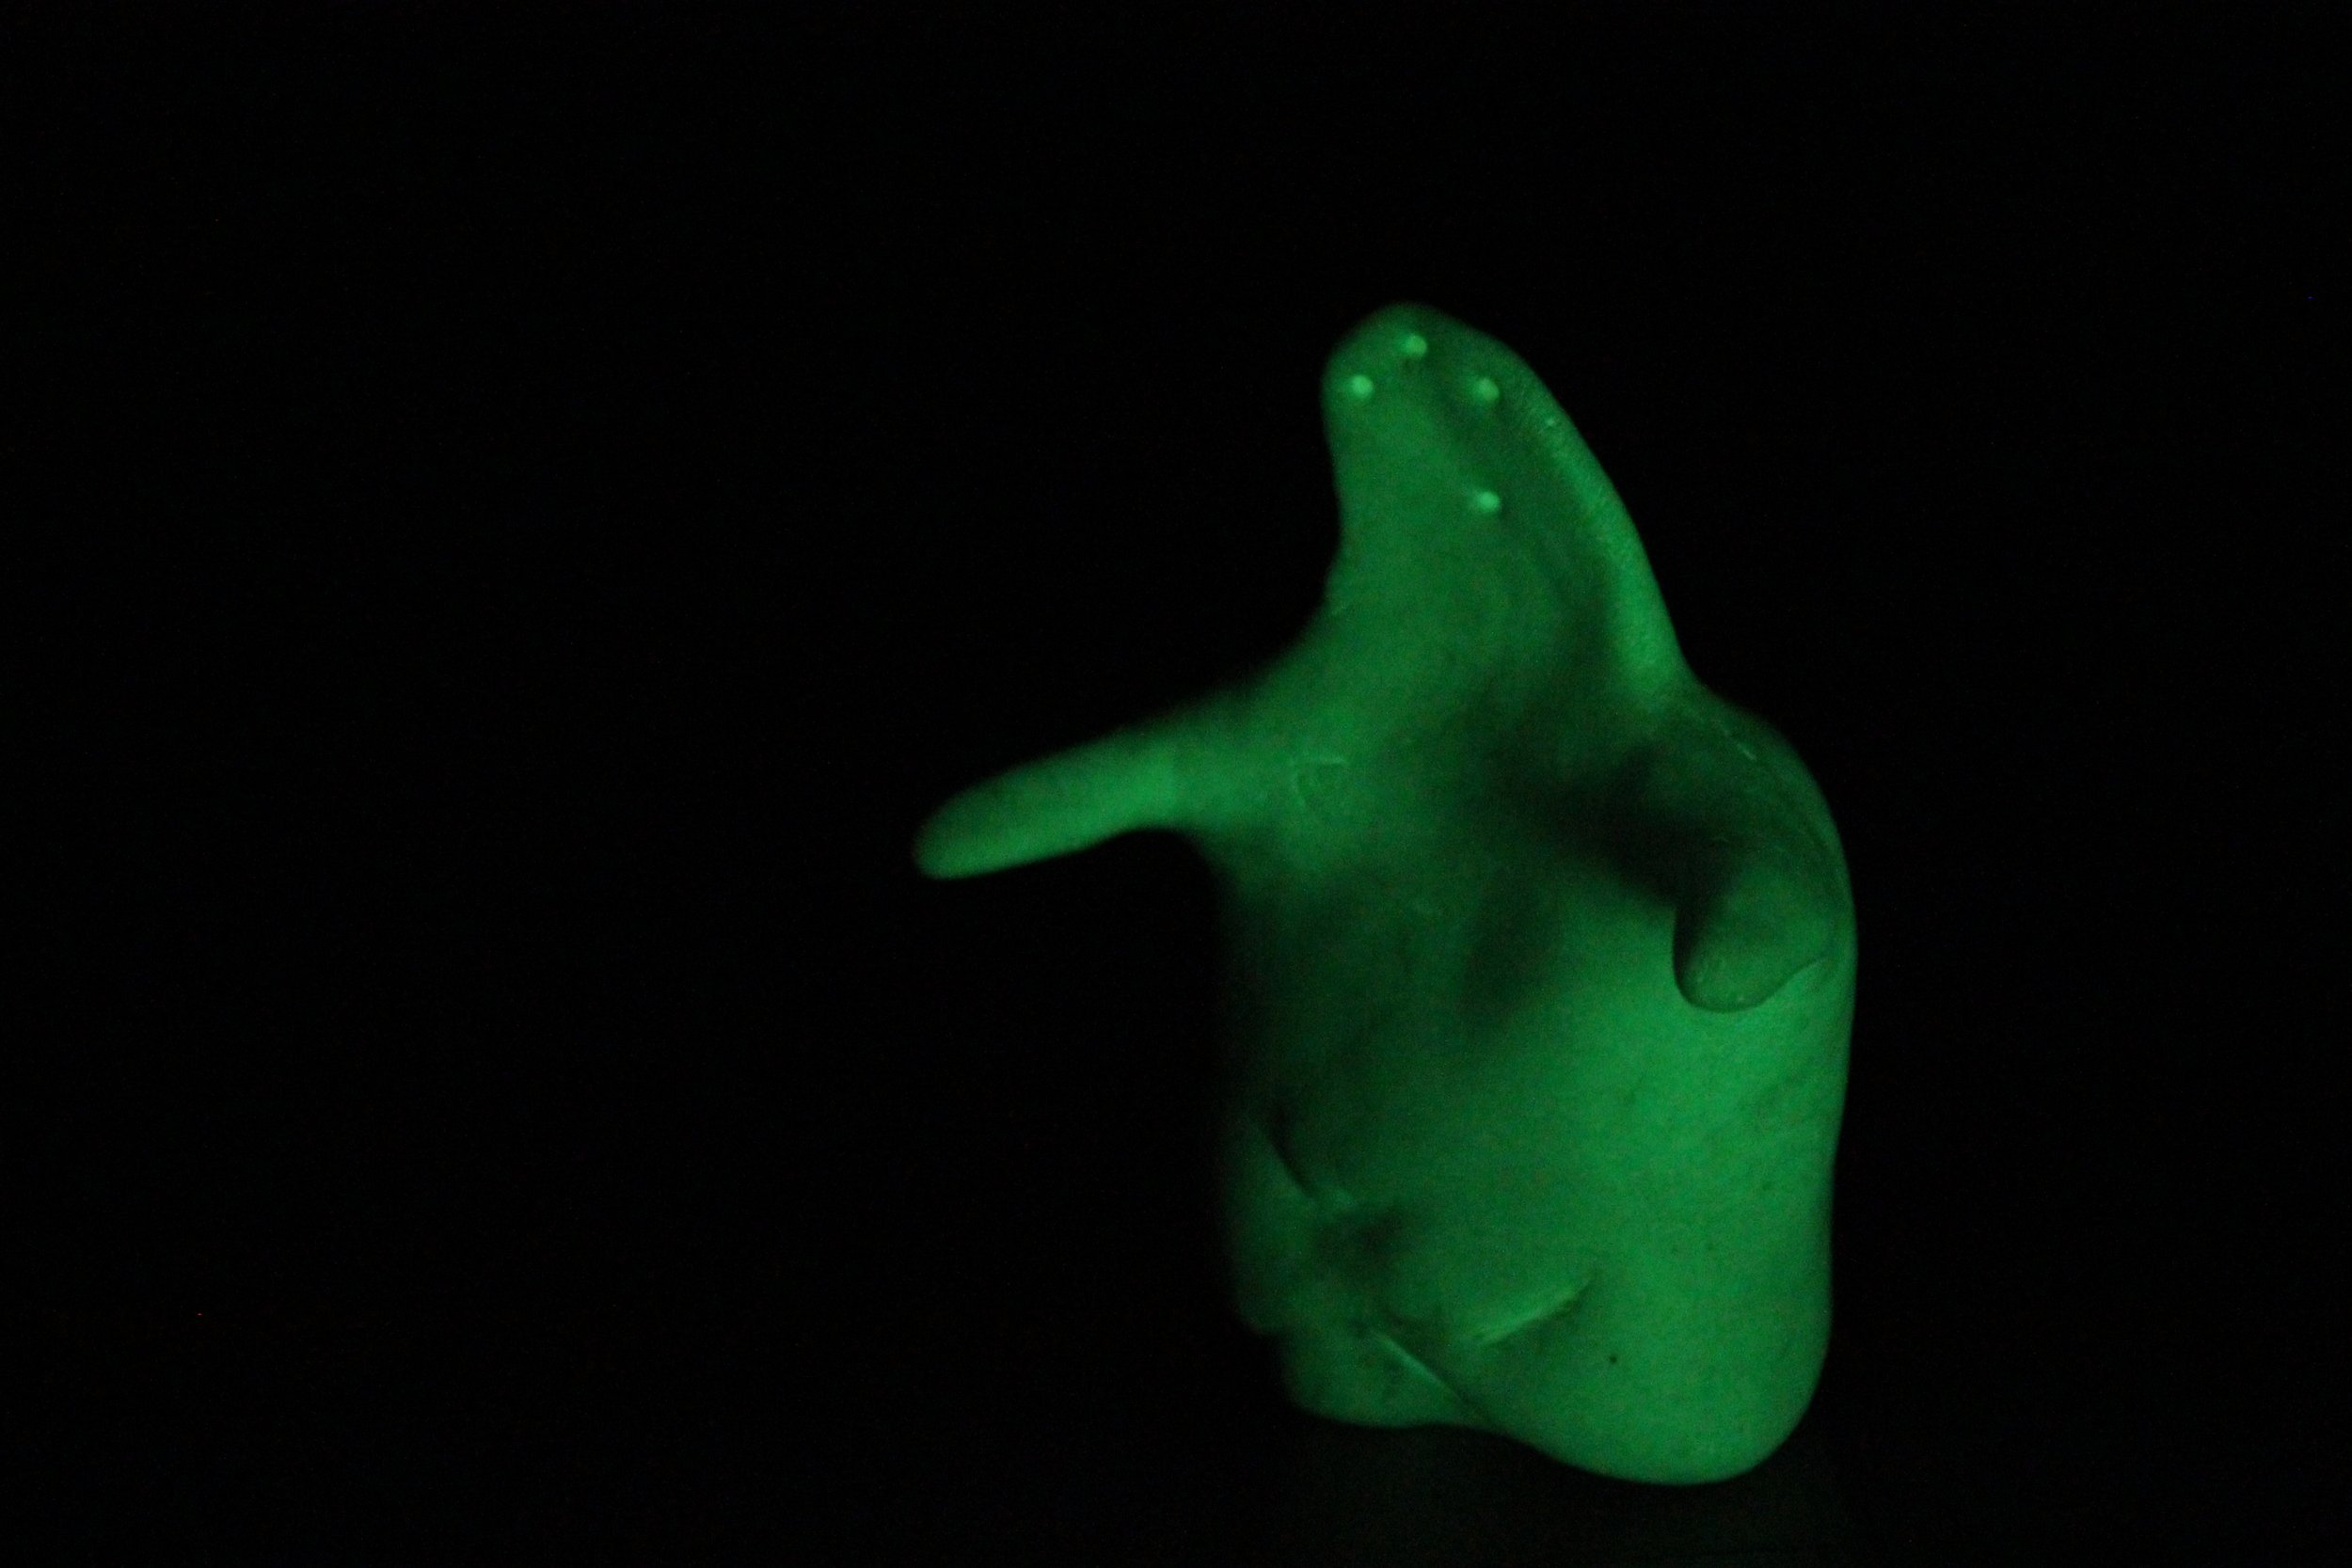   Glowing Ghost 1  glow in the dark clay. 2010 